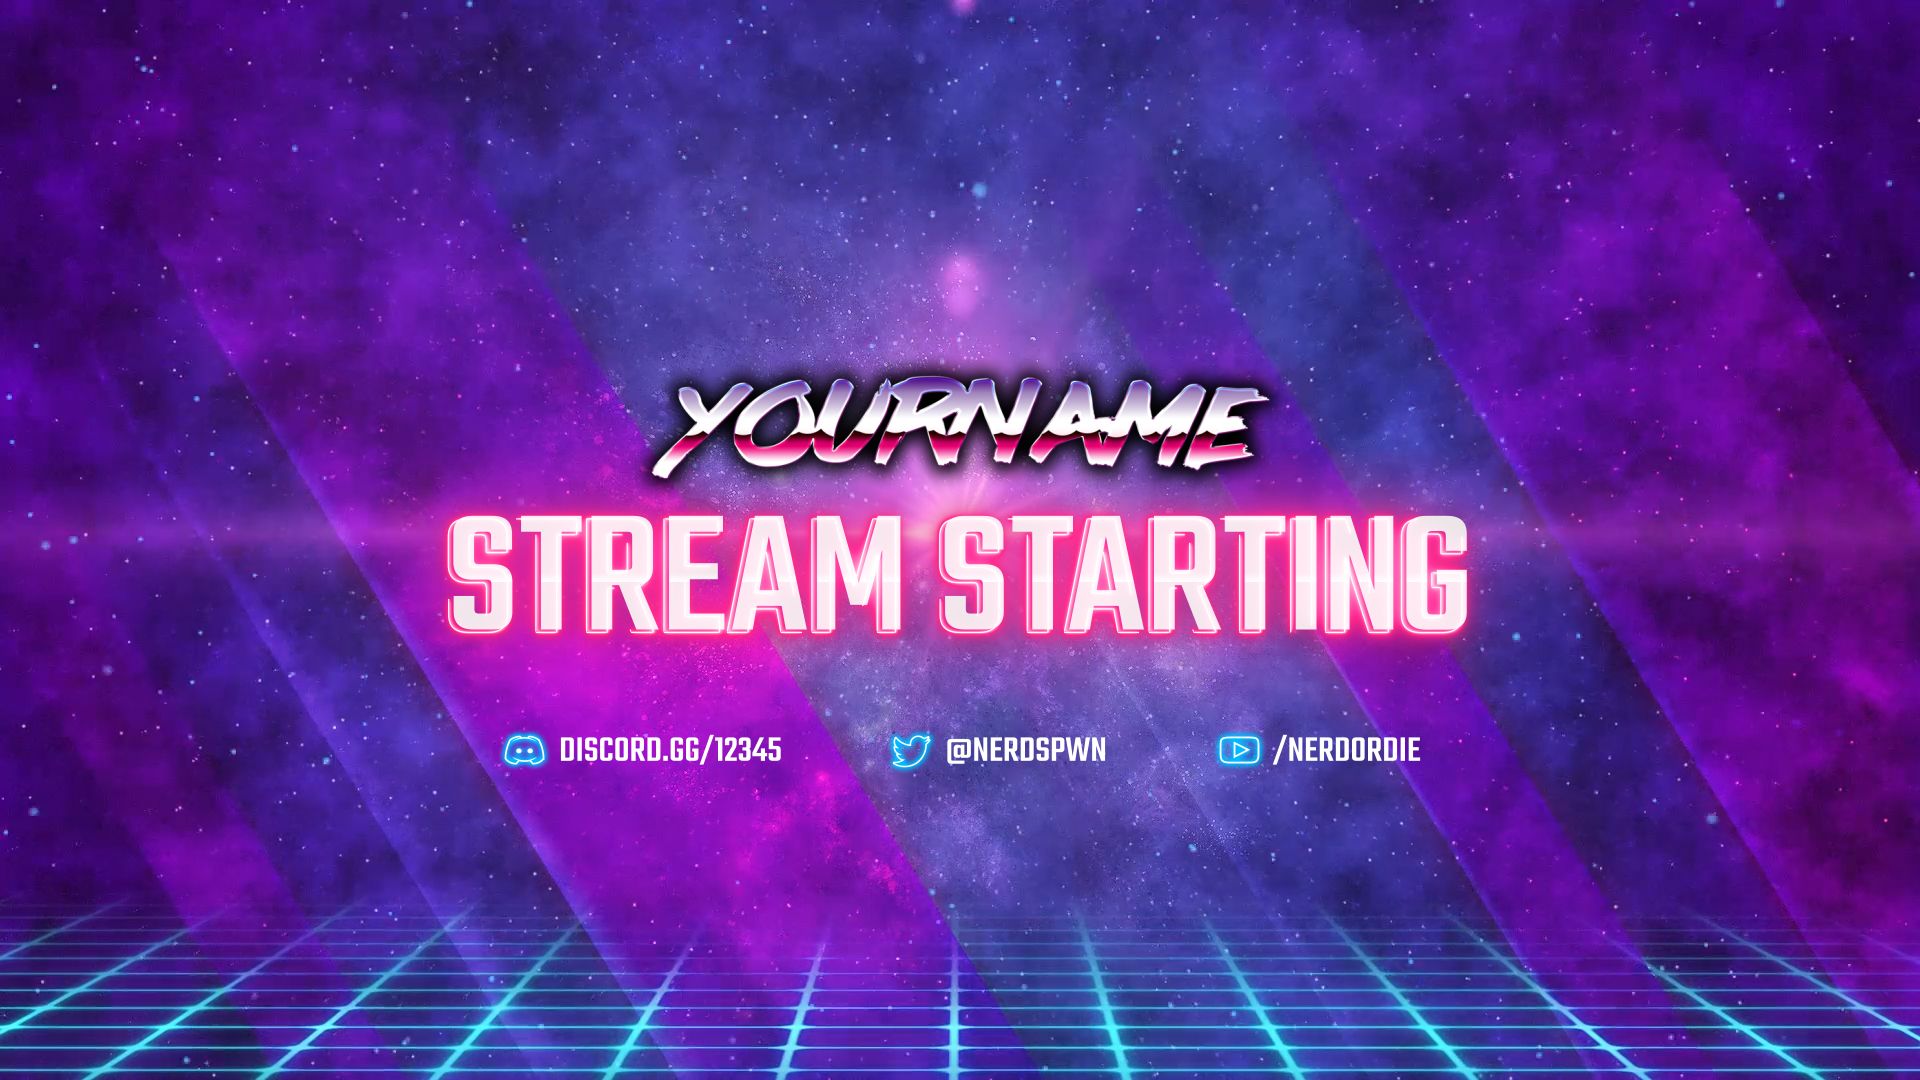 Retrowave, 80s Themed Stream Package for Twitch and Youtube Gaming